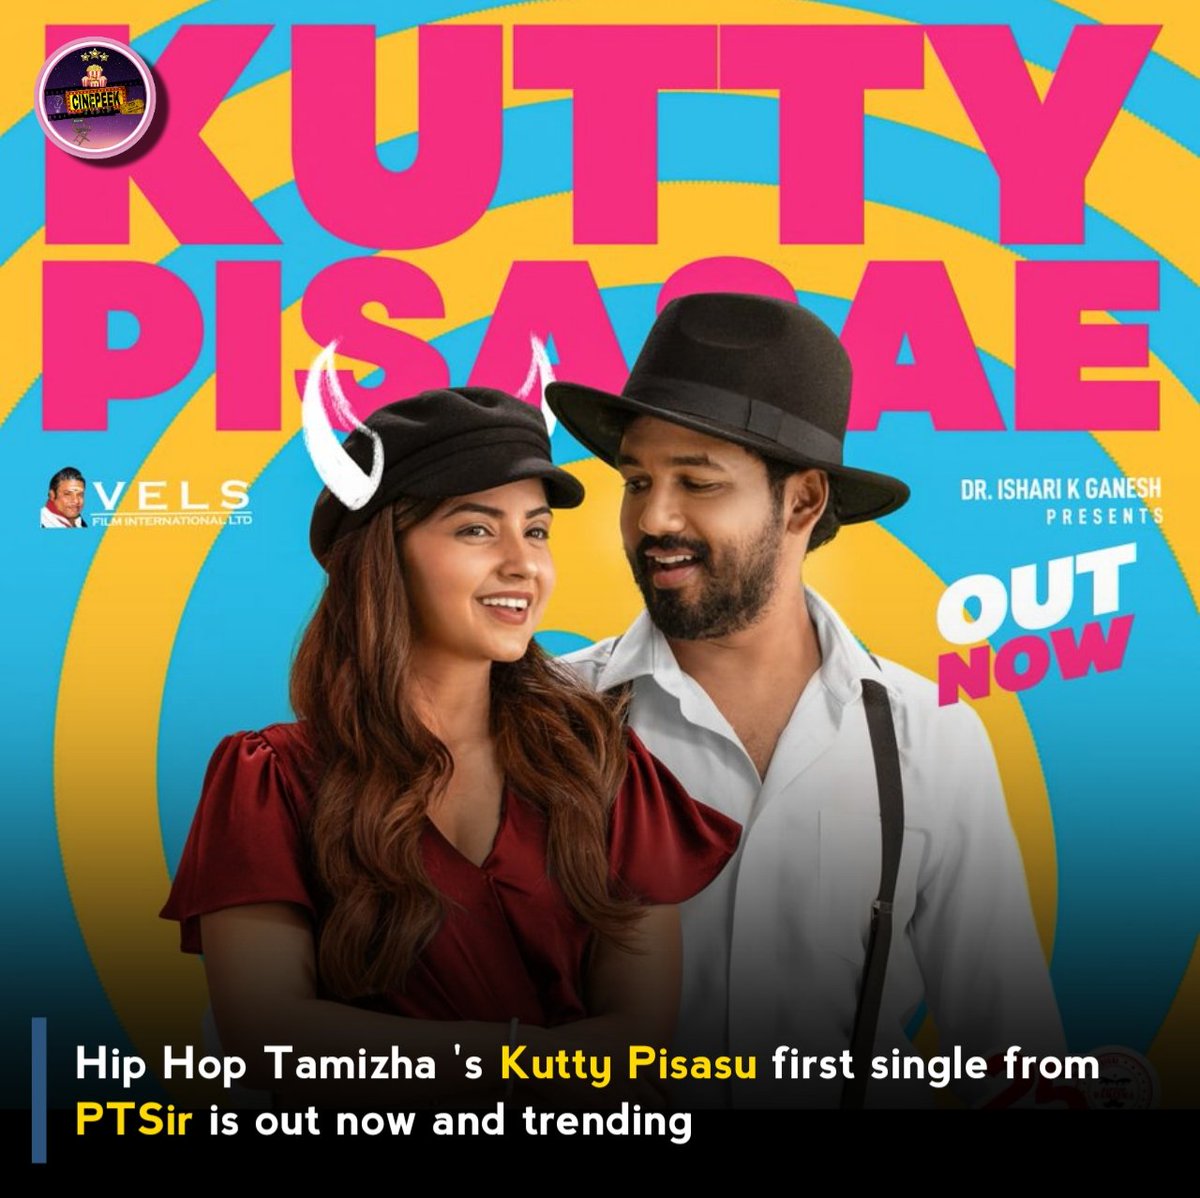 #FilmyBuzz - #HiphopTamizha #KuttyPisasu first single from #PTSir is out now and trending 😍 Link: youtu.be/V2tFtnb6Z1k @hiphoptamizha @proyuvraaj #CinePeek